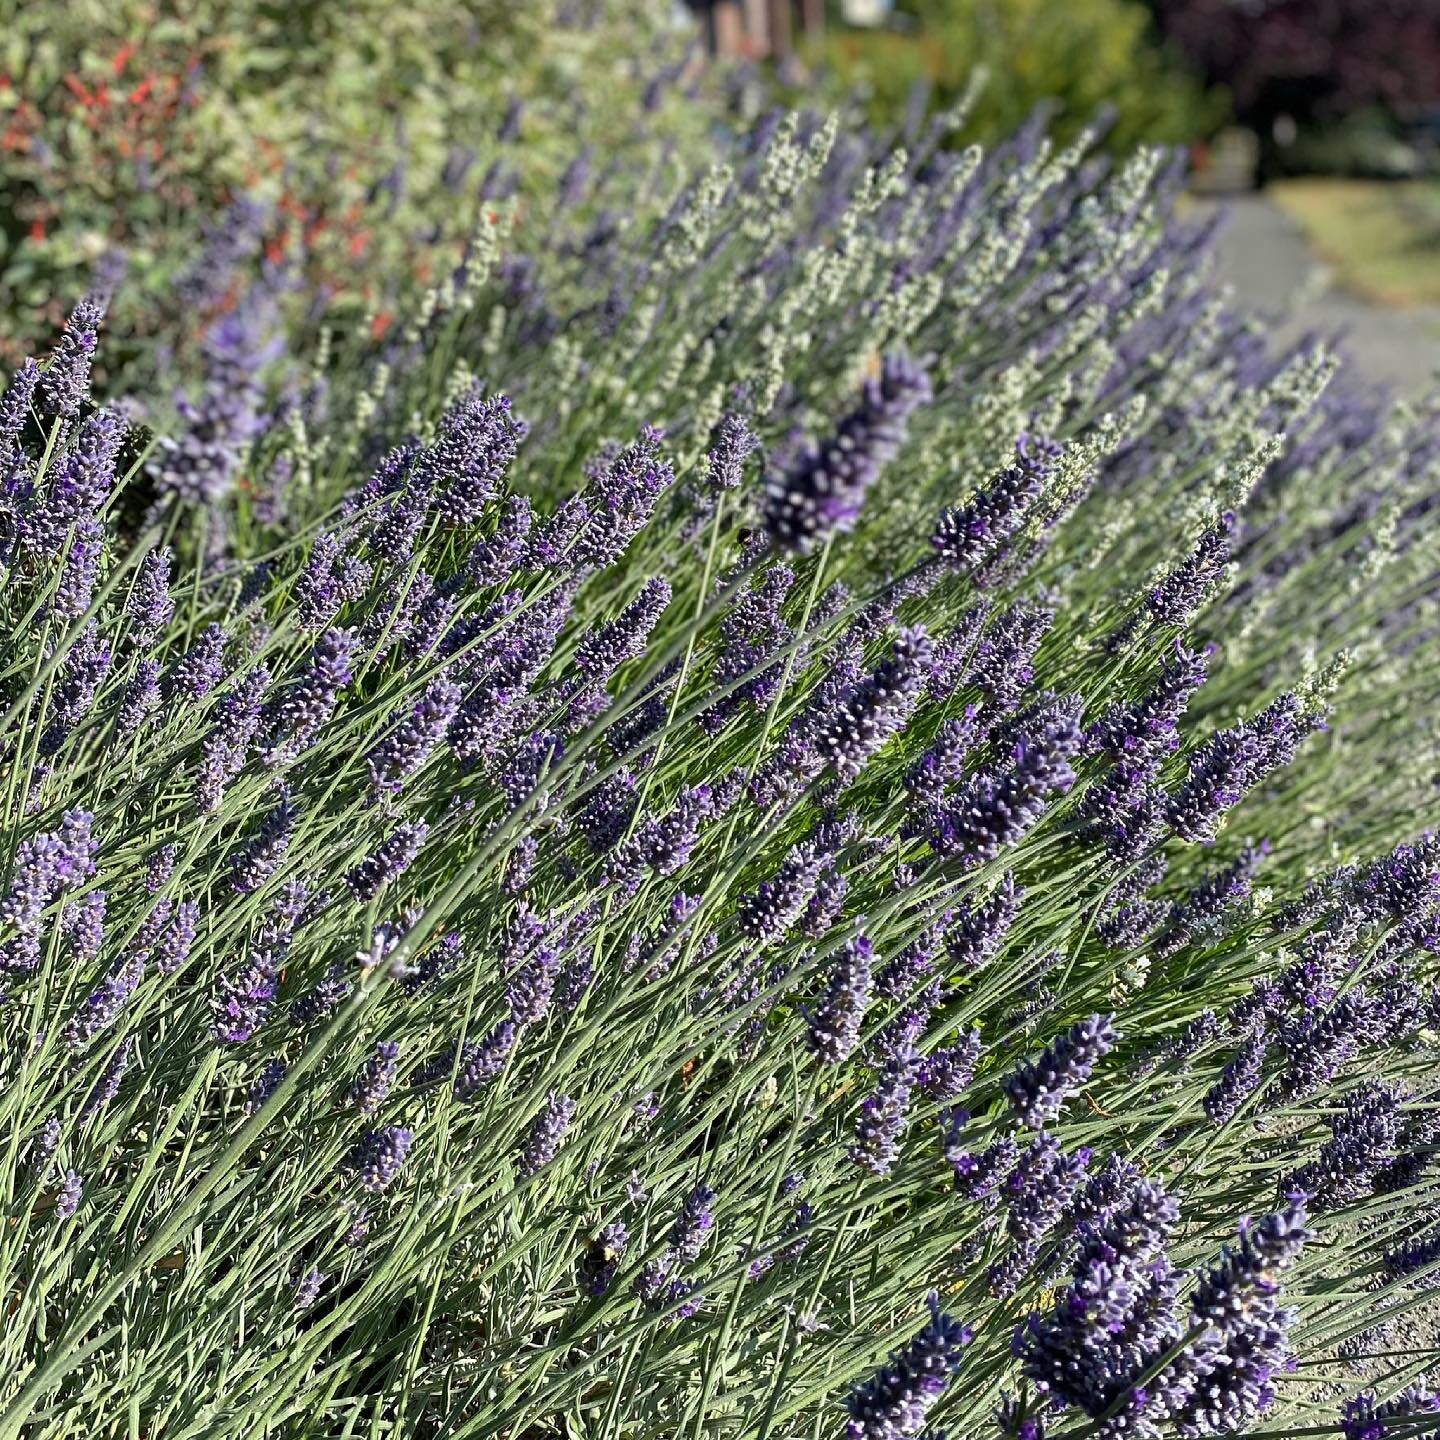 It&rsquo;s high lavender season in the PNW, y&rsquo;all! 🐝